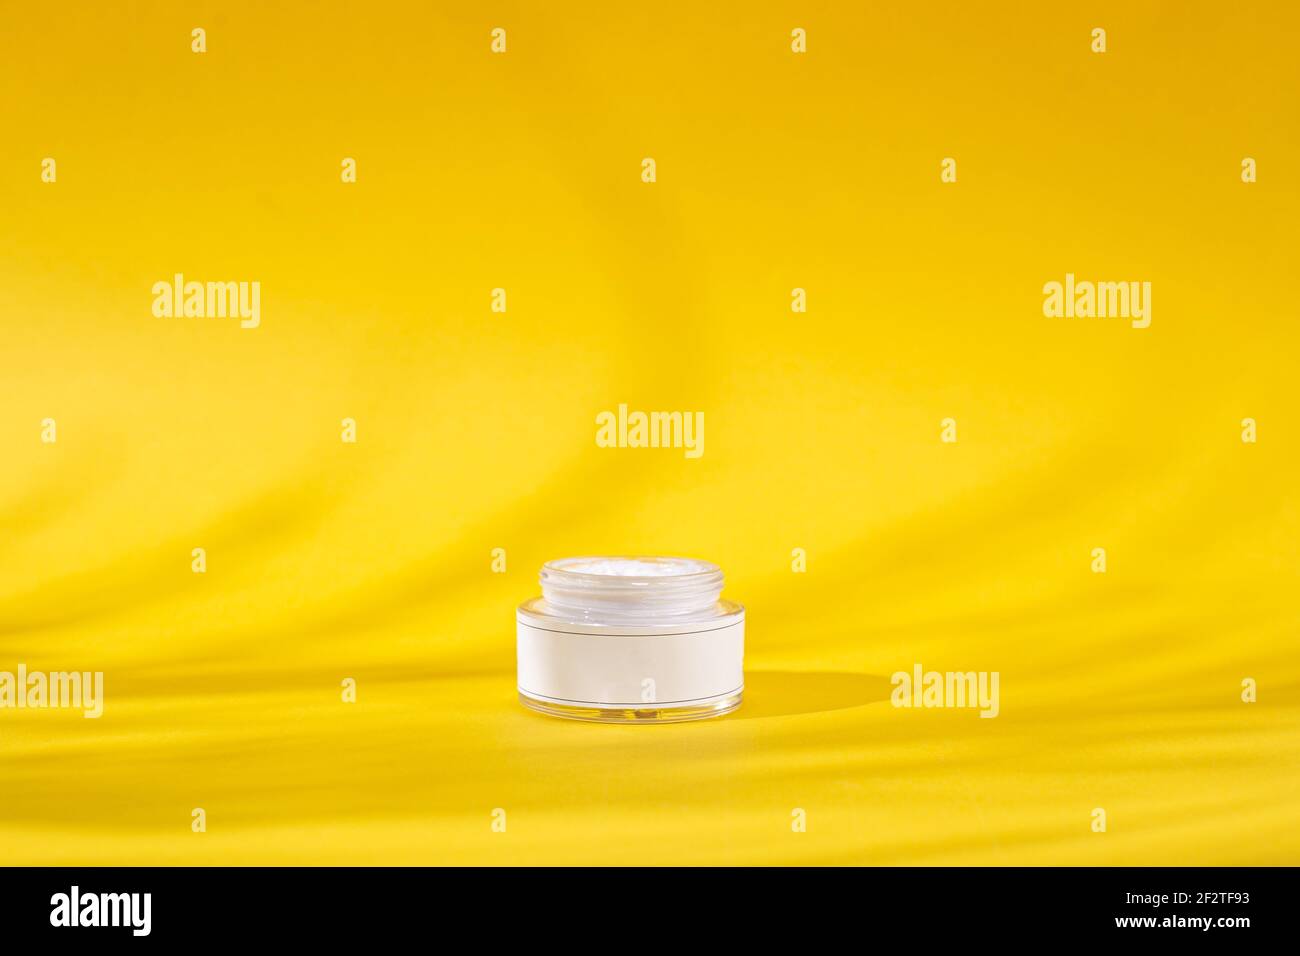 Skin Care Cream jar or bottle in a yellow background with shades, add your own logo or text Stock Photo